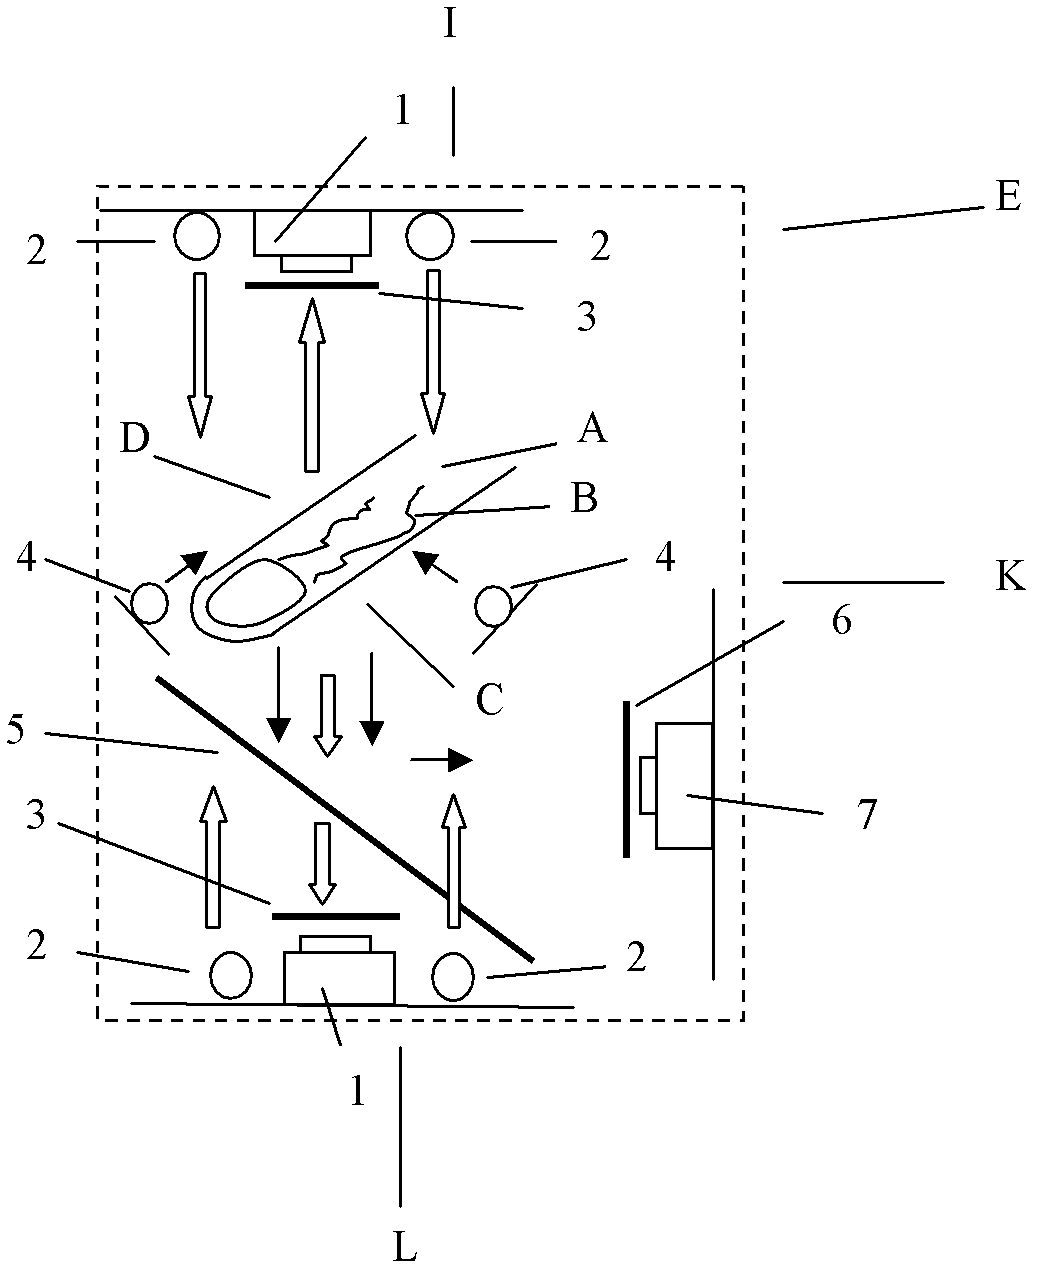 Imaging device based on finger biometric information and multimoding identity recognition method